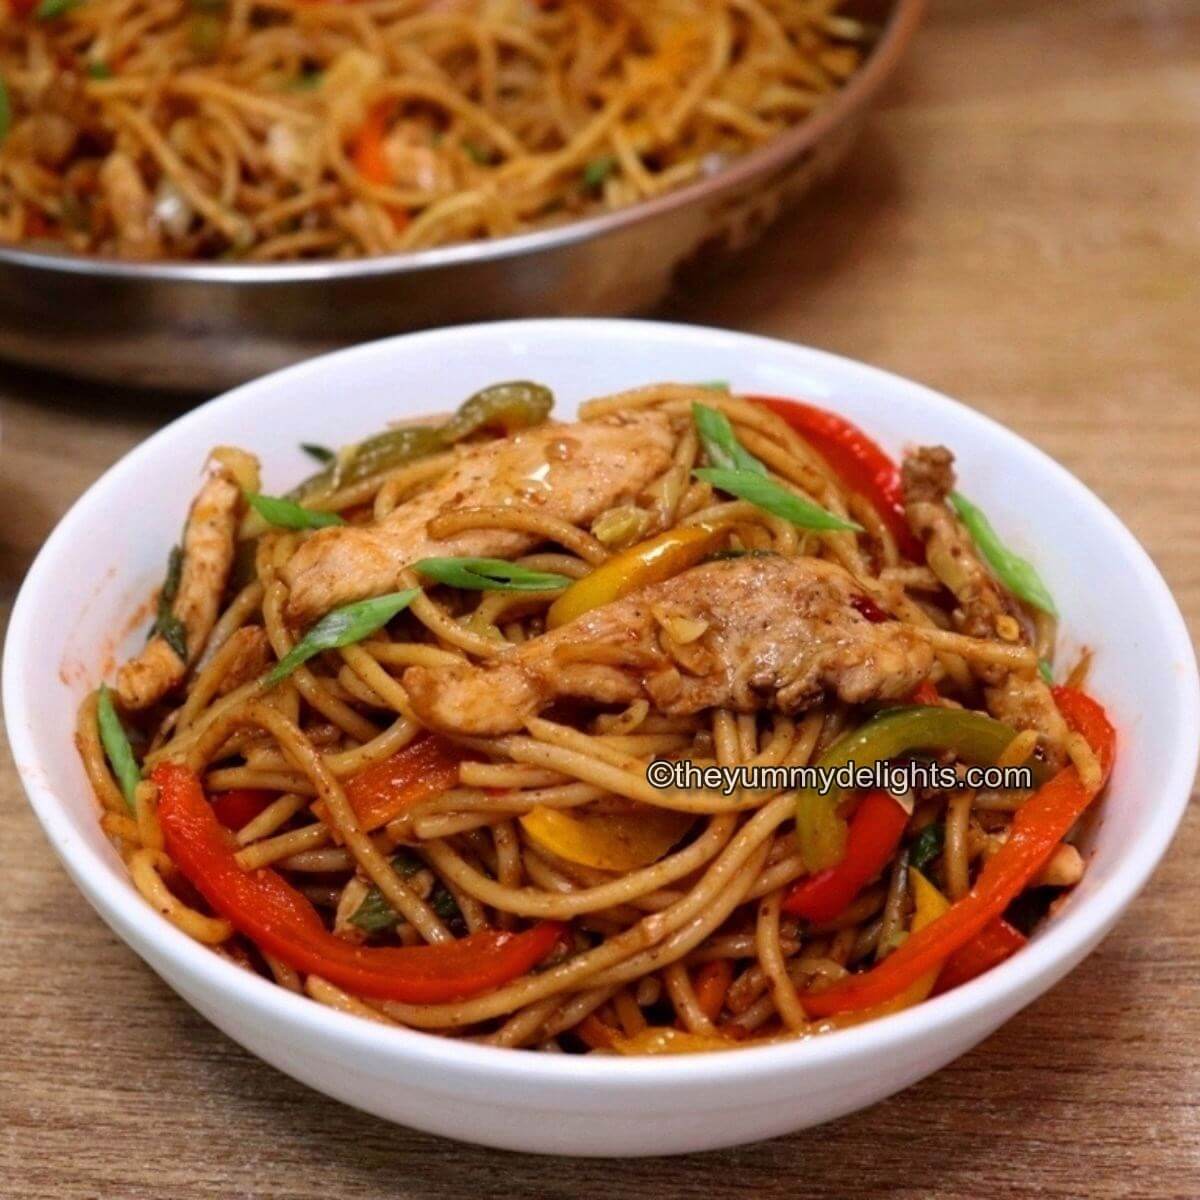 close-up of chicken stir fry with noodles served in a white bowl. Garnished with green onions.